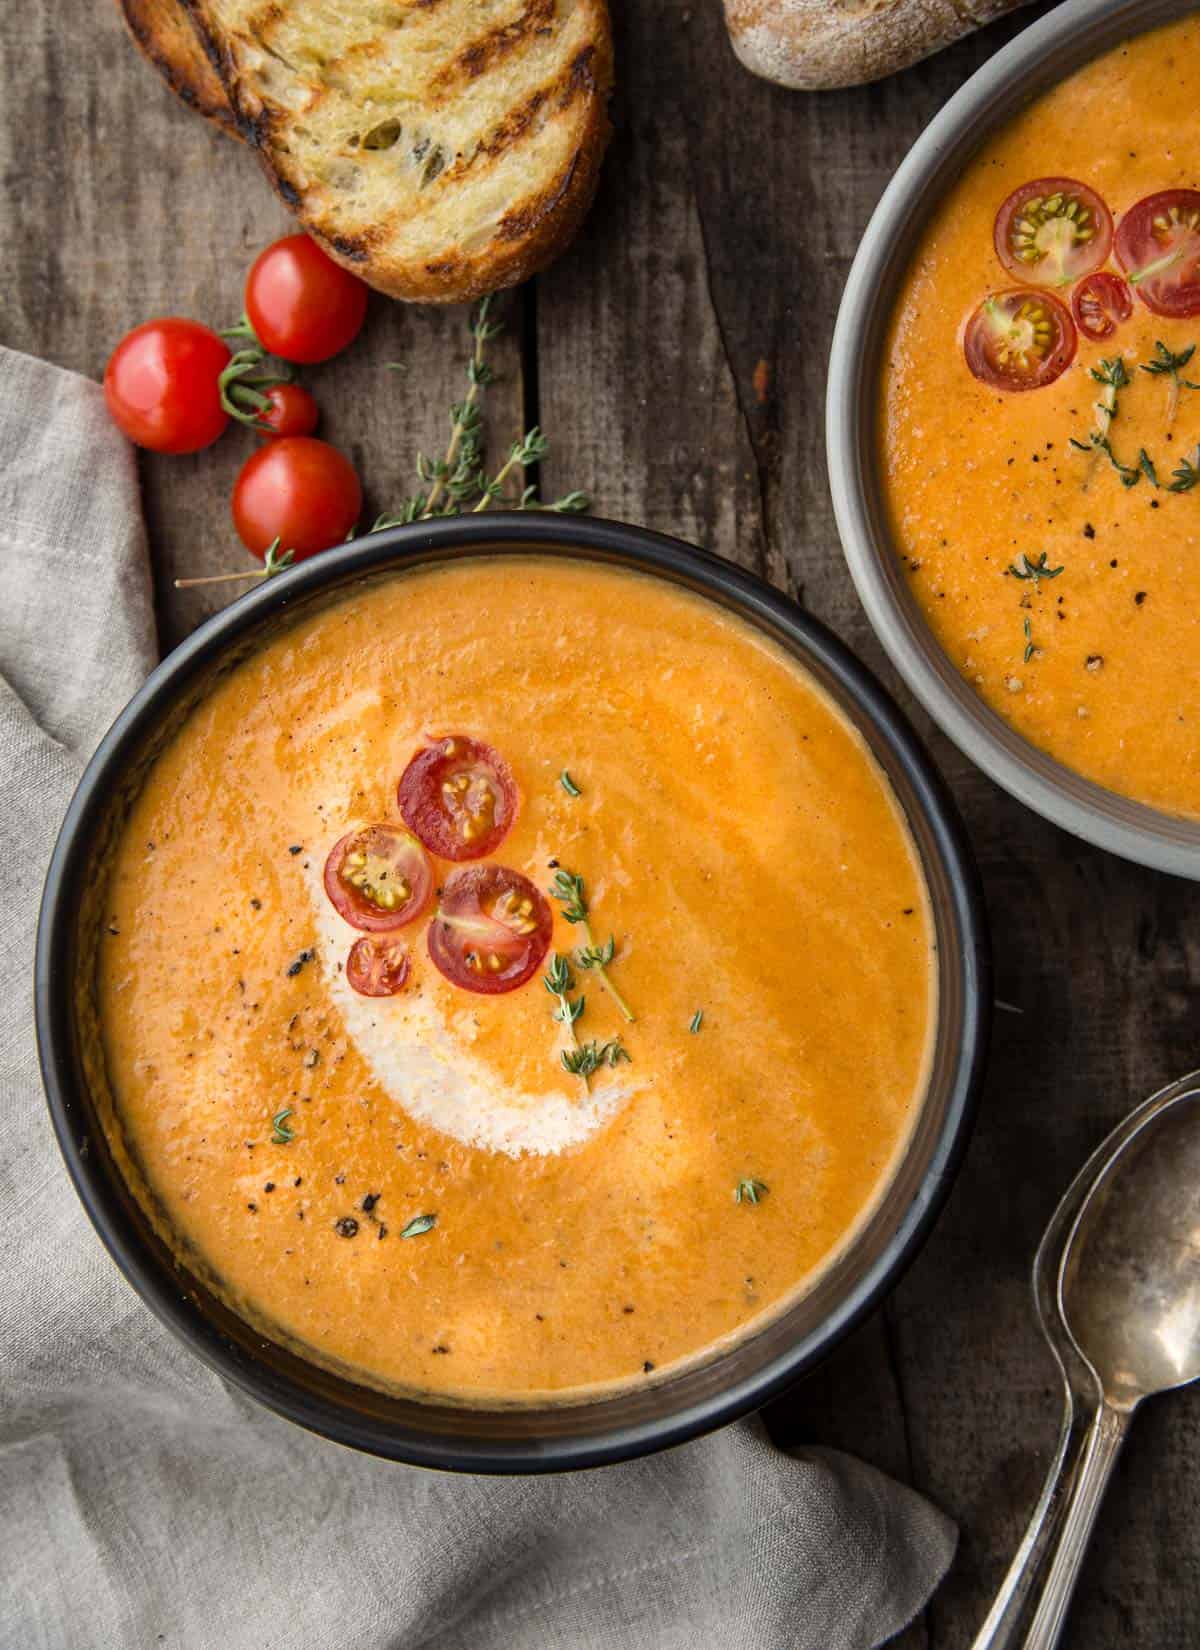 A bowl of smoked tomato bisque topped with fresh tomatoes and a side of toasted bread